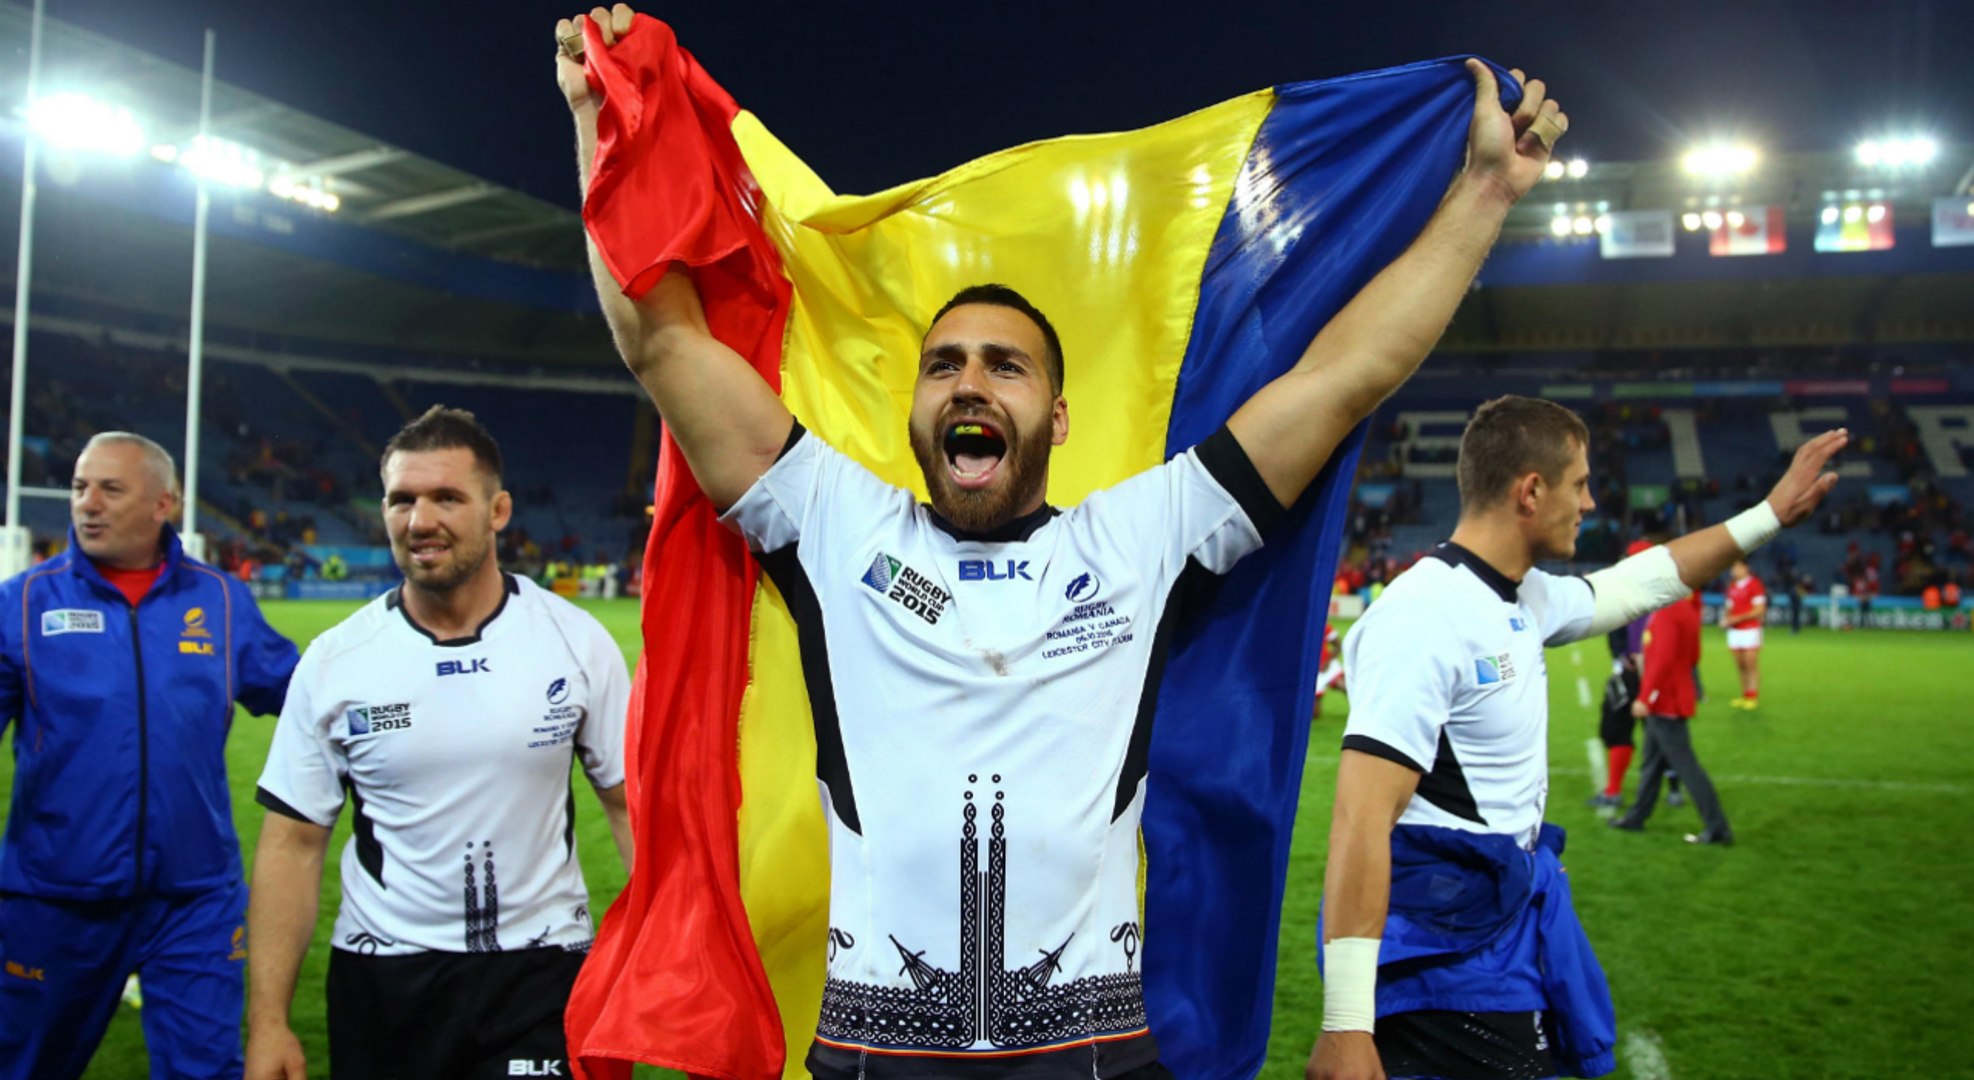 Jubilant scenes as Romania beat Canada in an amazing comeback - video  Dailymotion